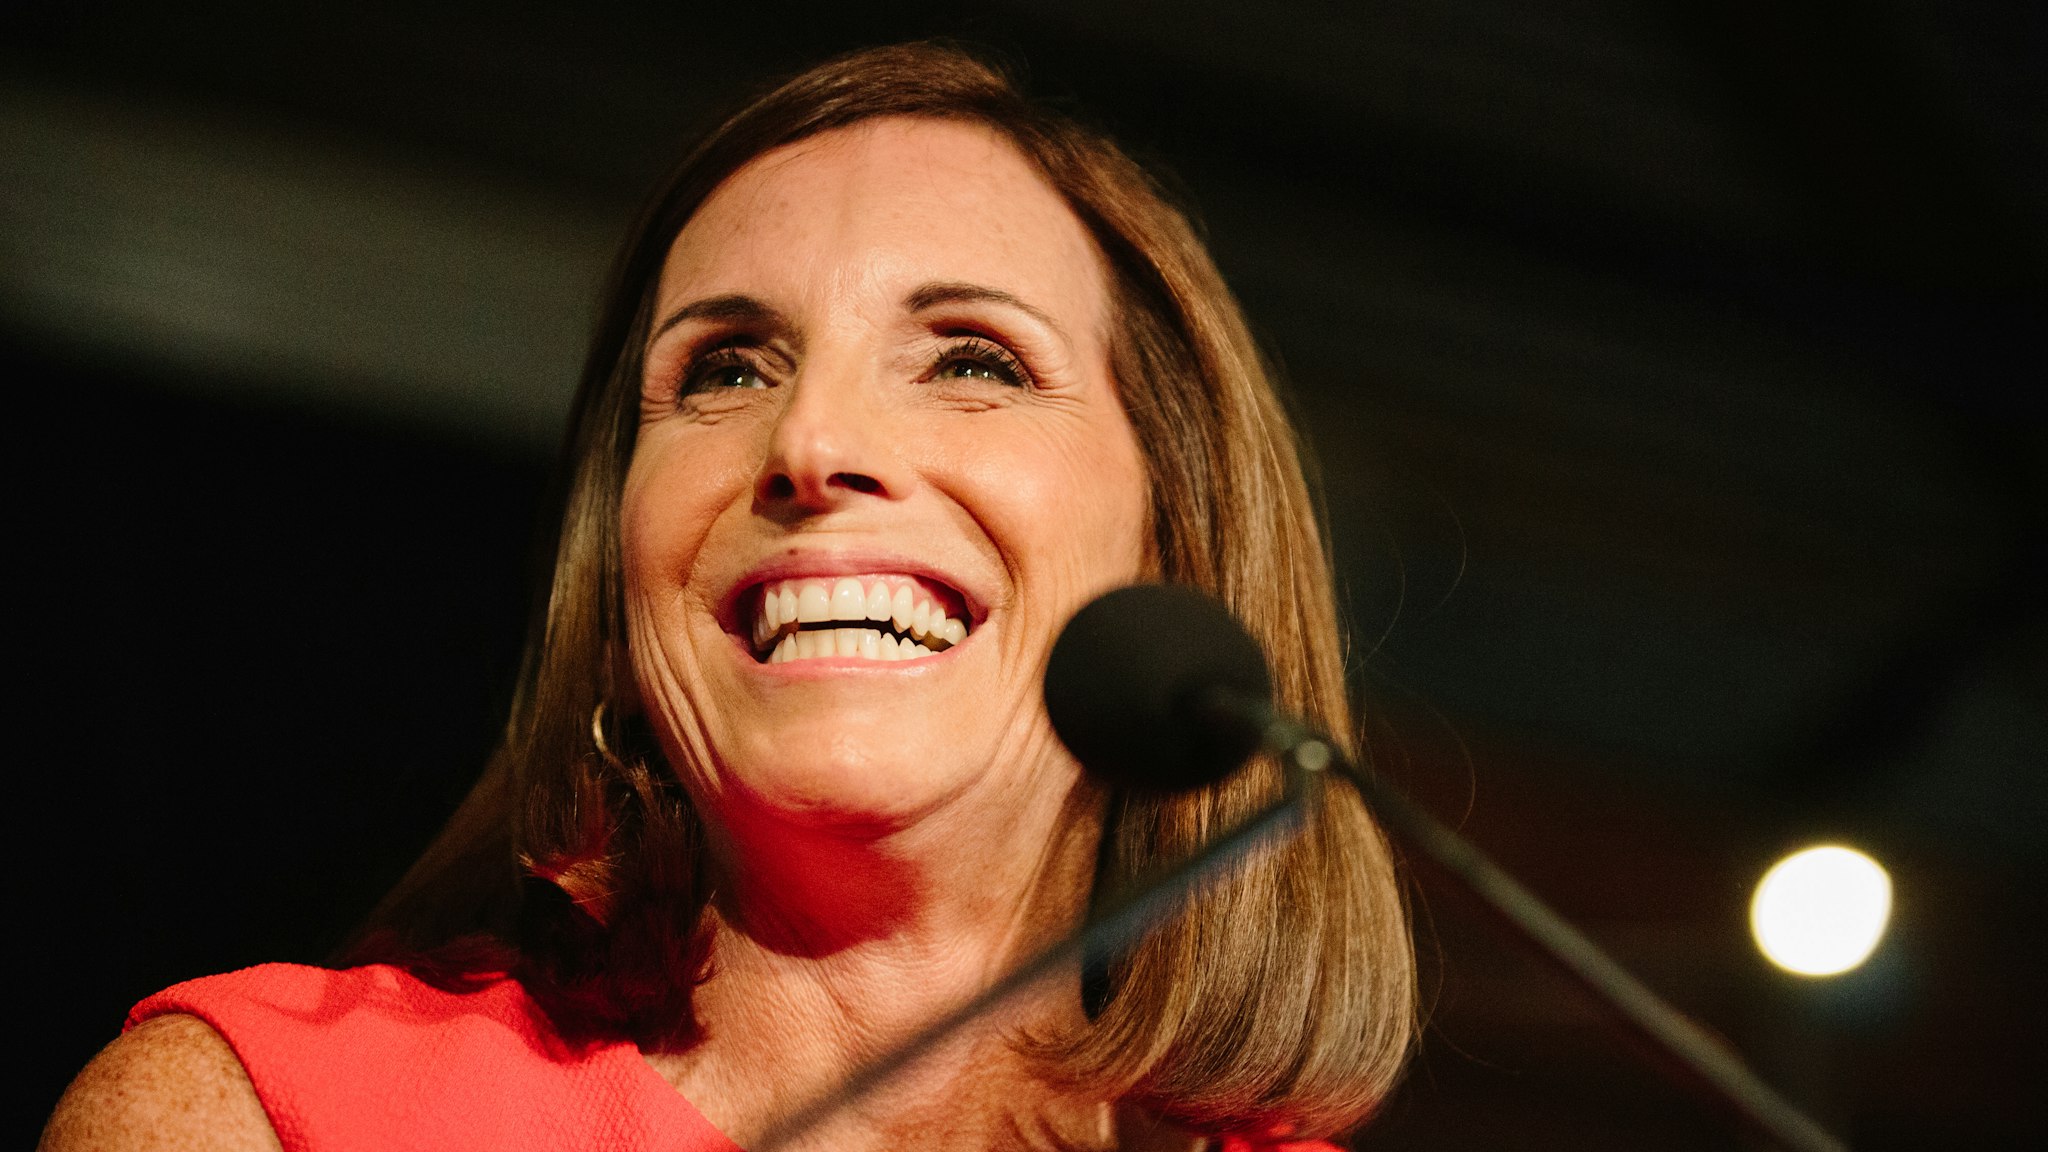 Martha McSally, Republican U.S. Senate candidate from Arizona, speaks during an election night rally in Tempe, Arizona, U.S., on Tuesday, Aug. 27, 2018. Arizona is poised to elect its first female senator in November after front-runner McSally beat two hardliners in a Republican primary in which President Donald Trump loomed large even though he didnt officially endorse anyone.